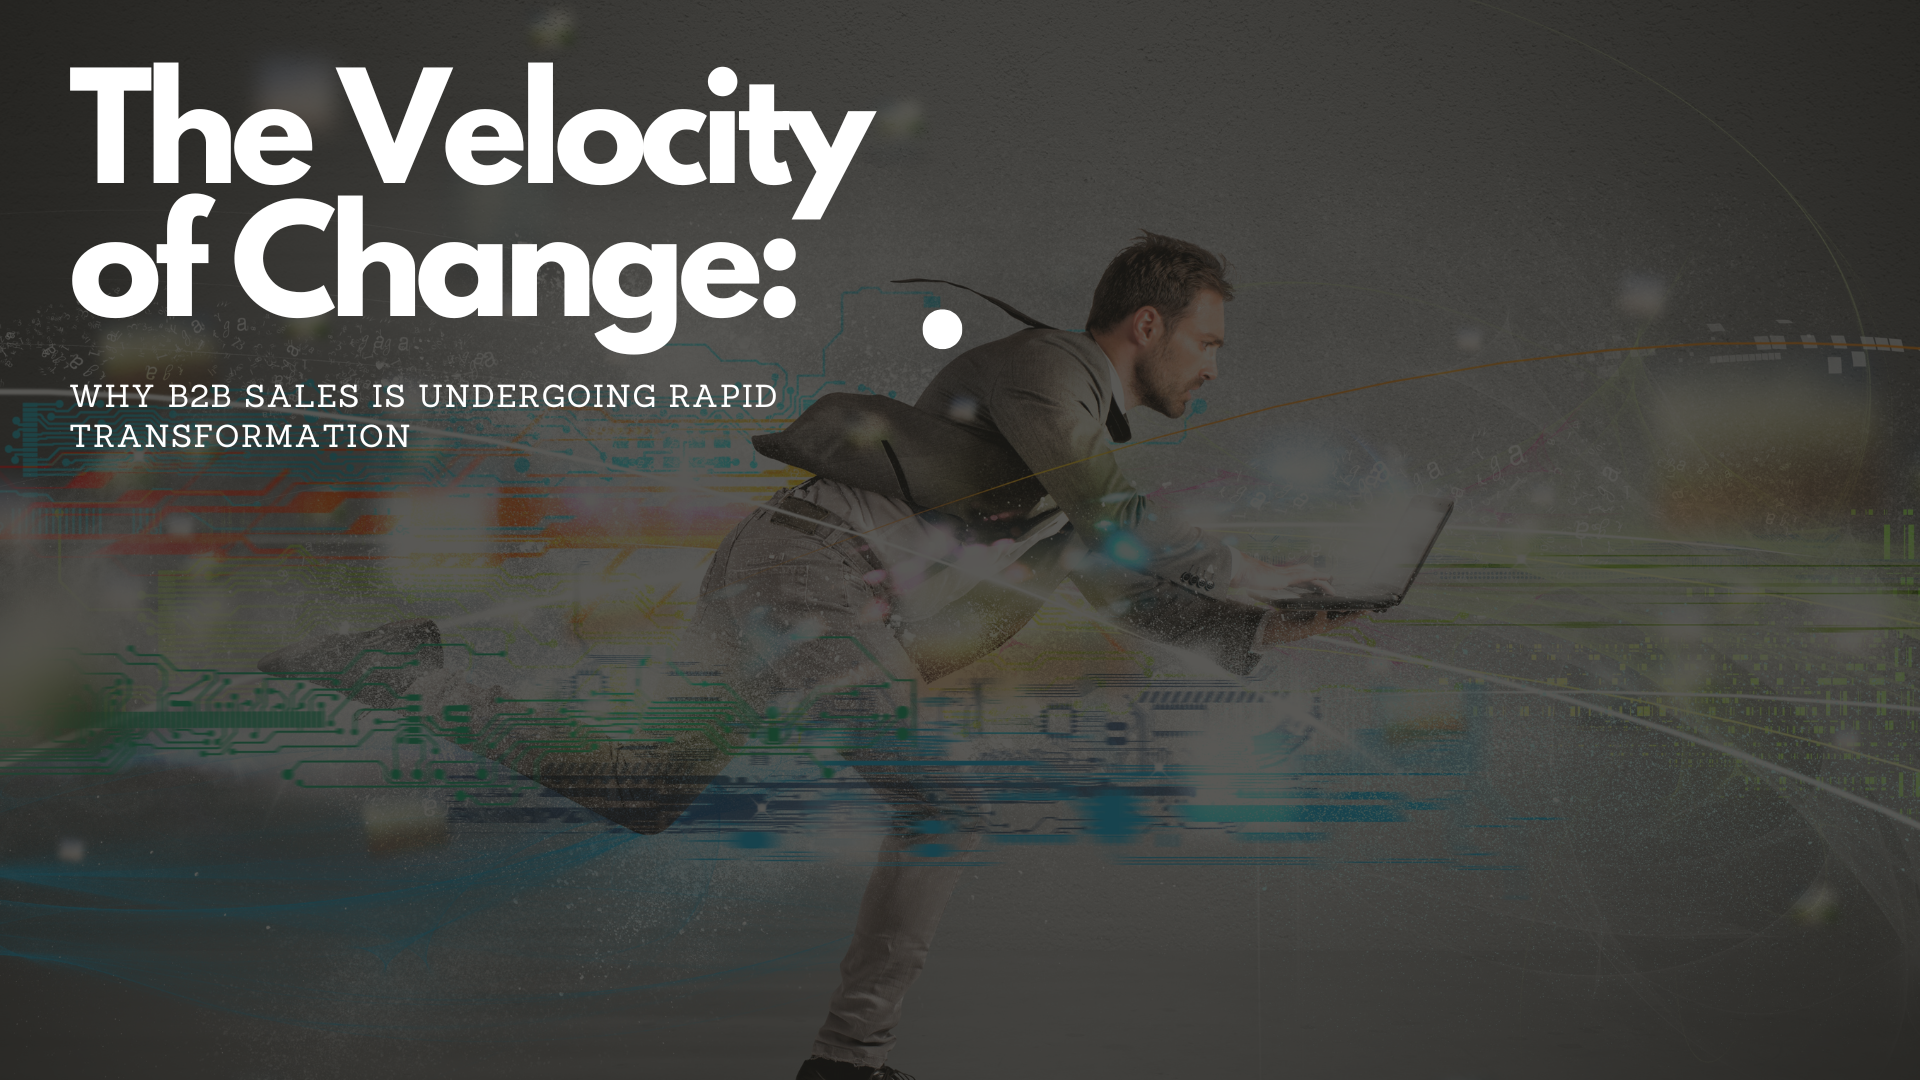 The Velocity of Change: Why B2B Sales is Undergoing Rapid Transformation